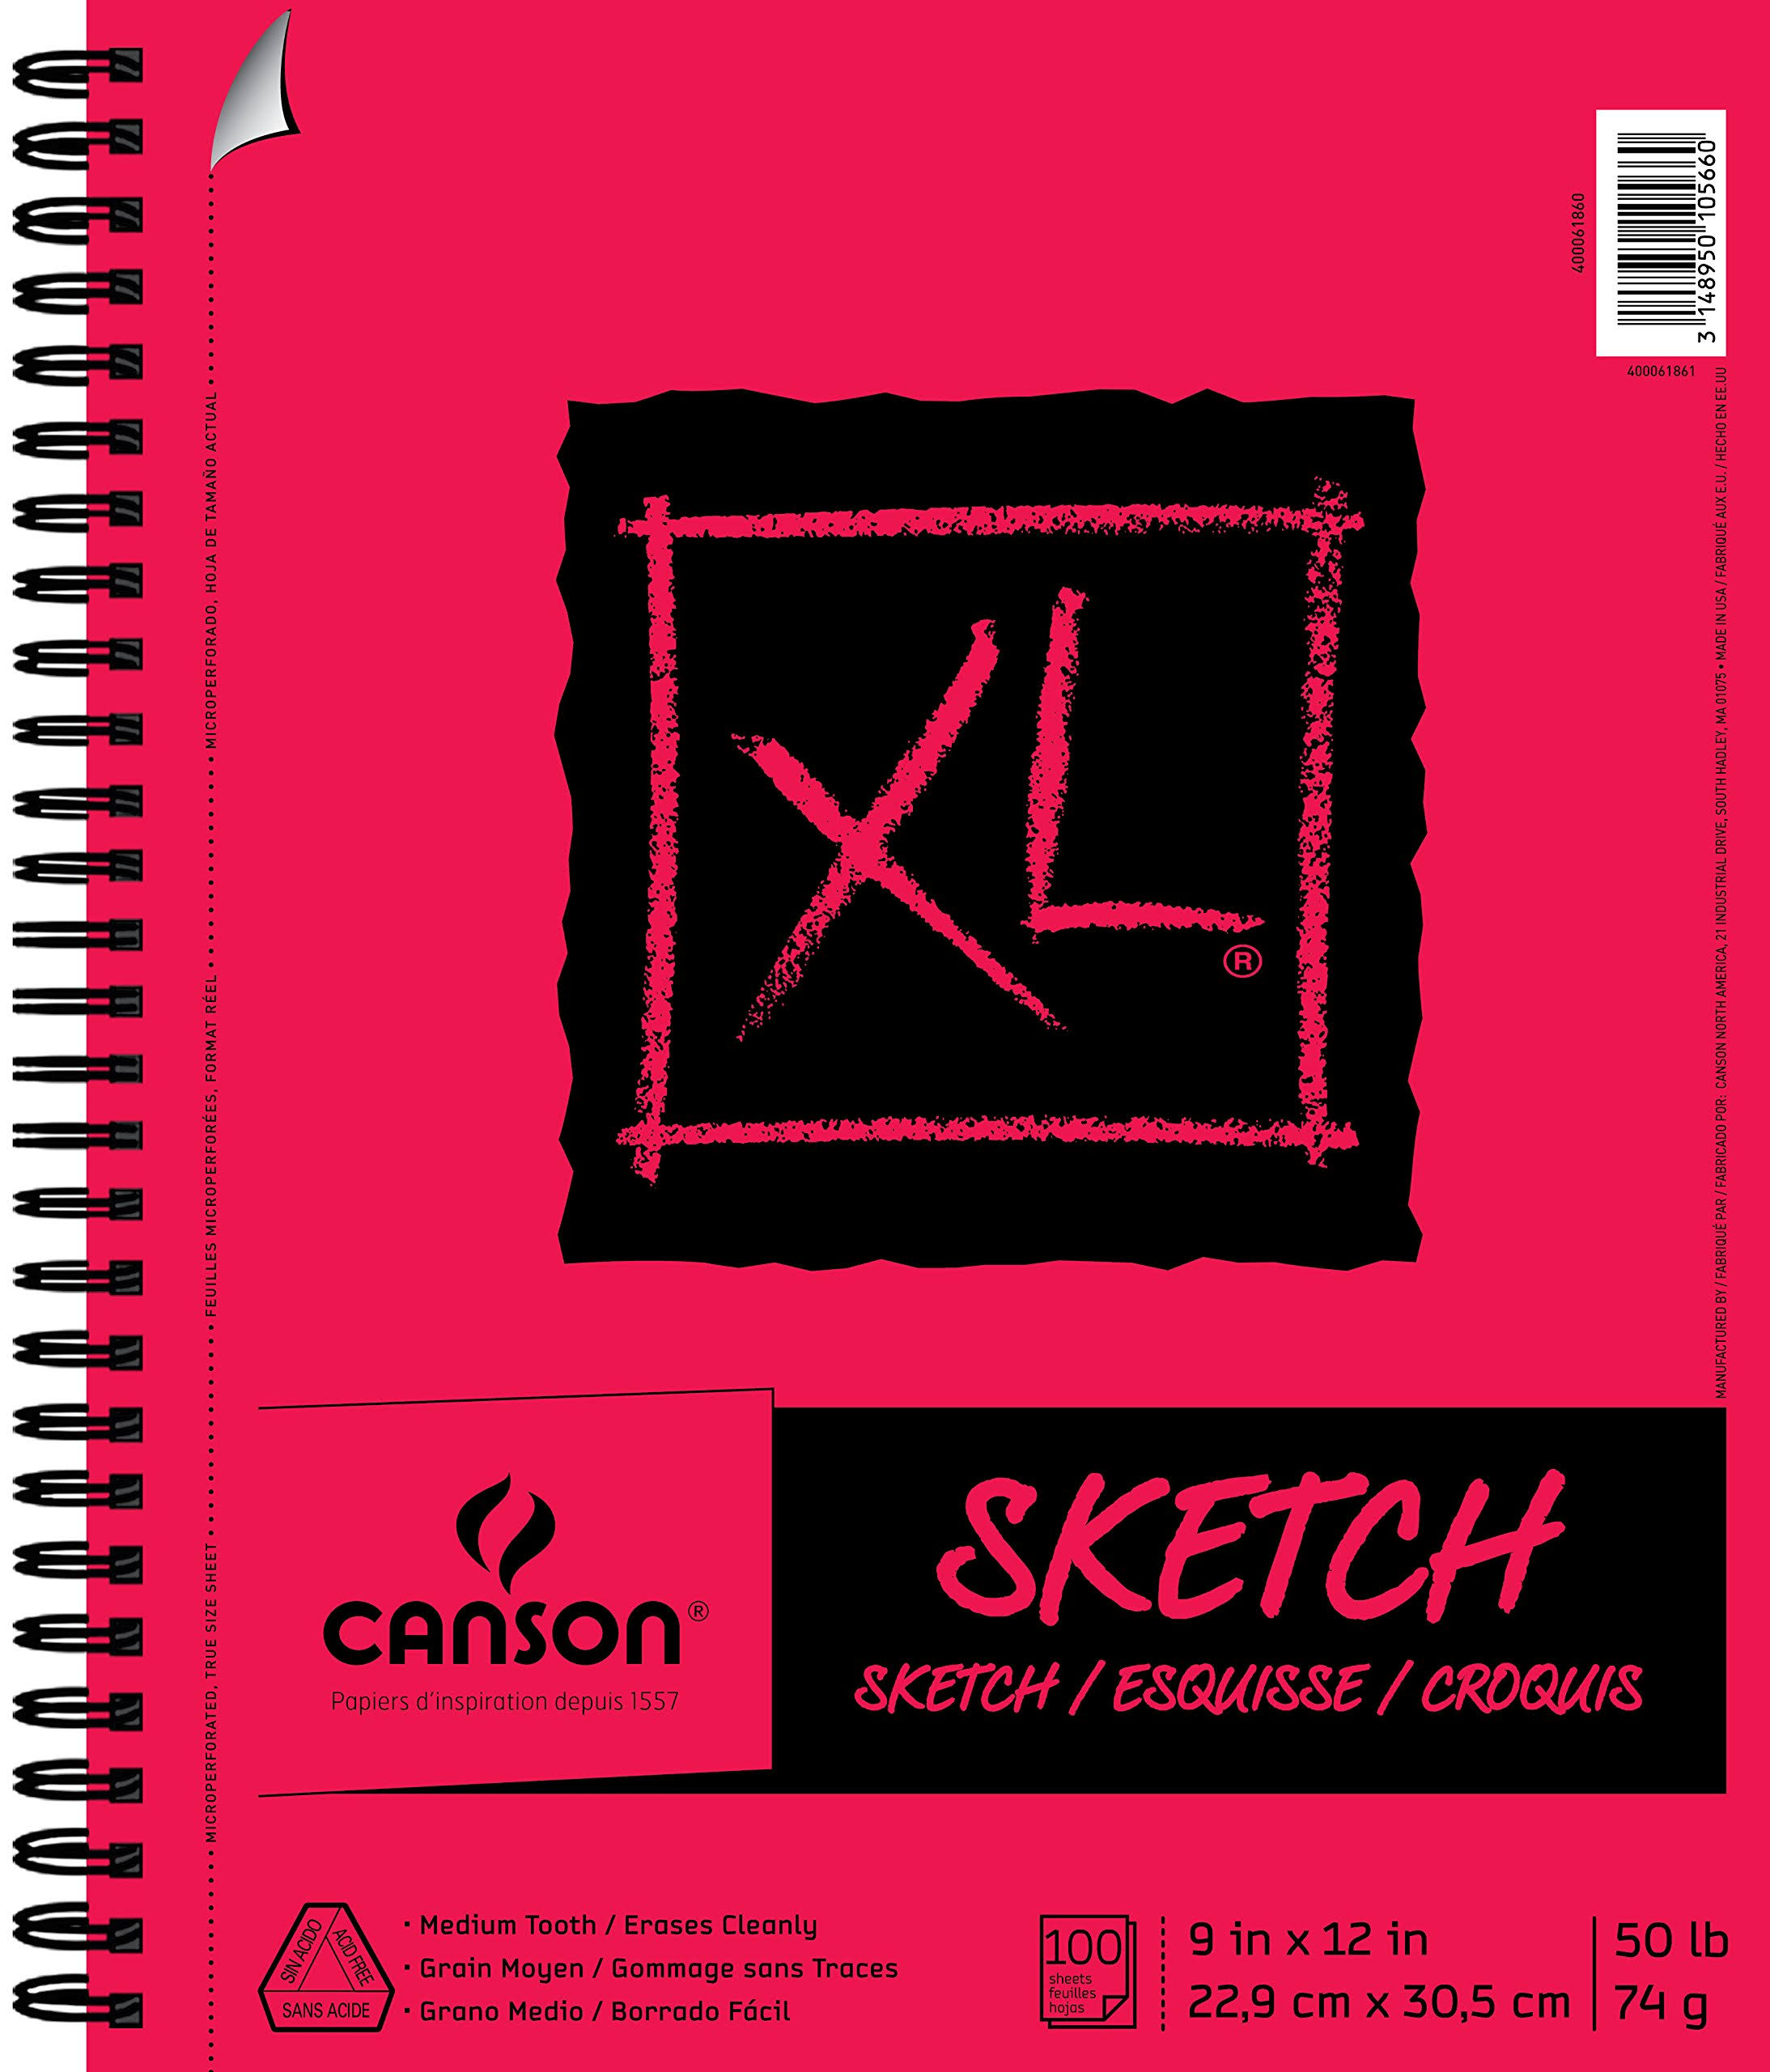 Canson Xl Series Sketch Pad - Red, 9" x 12"